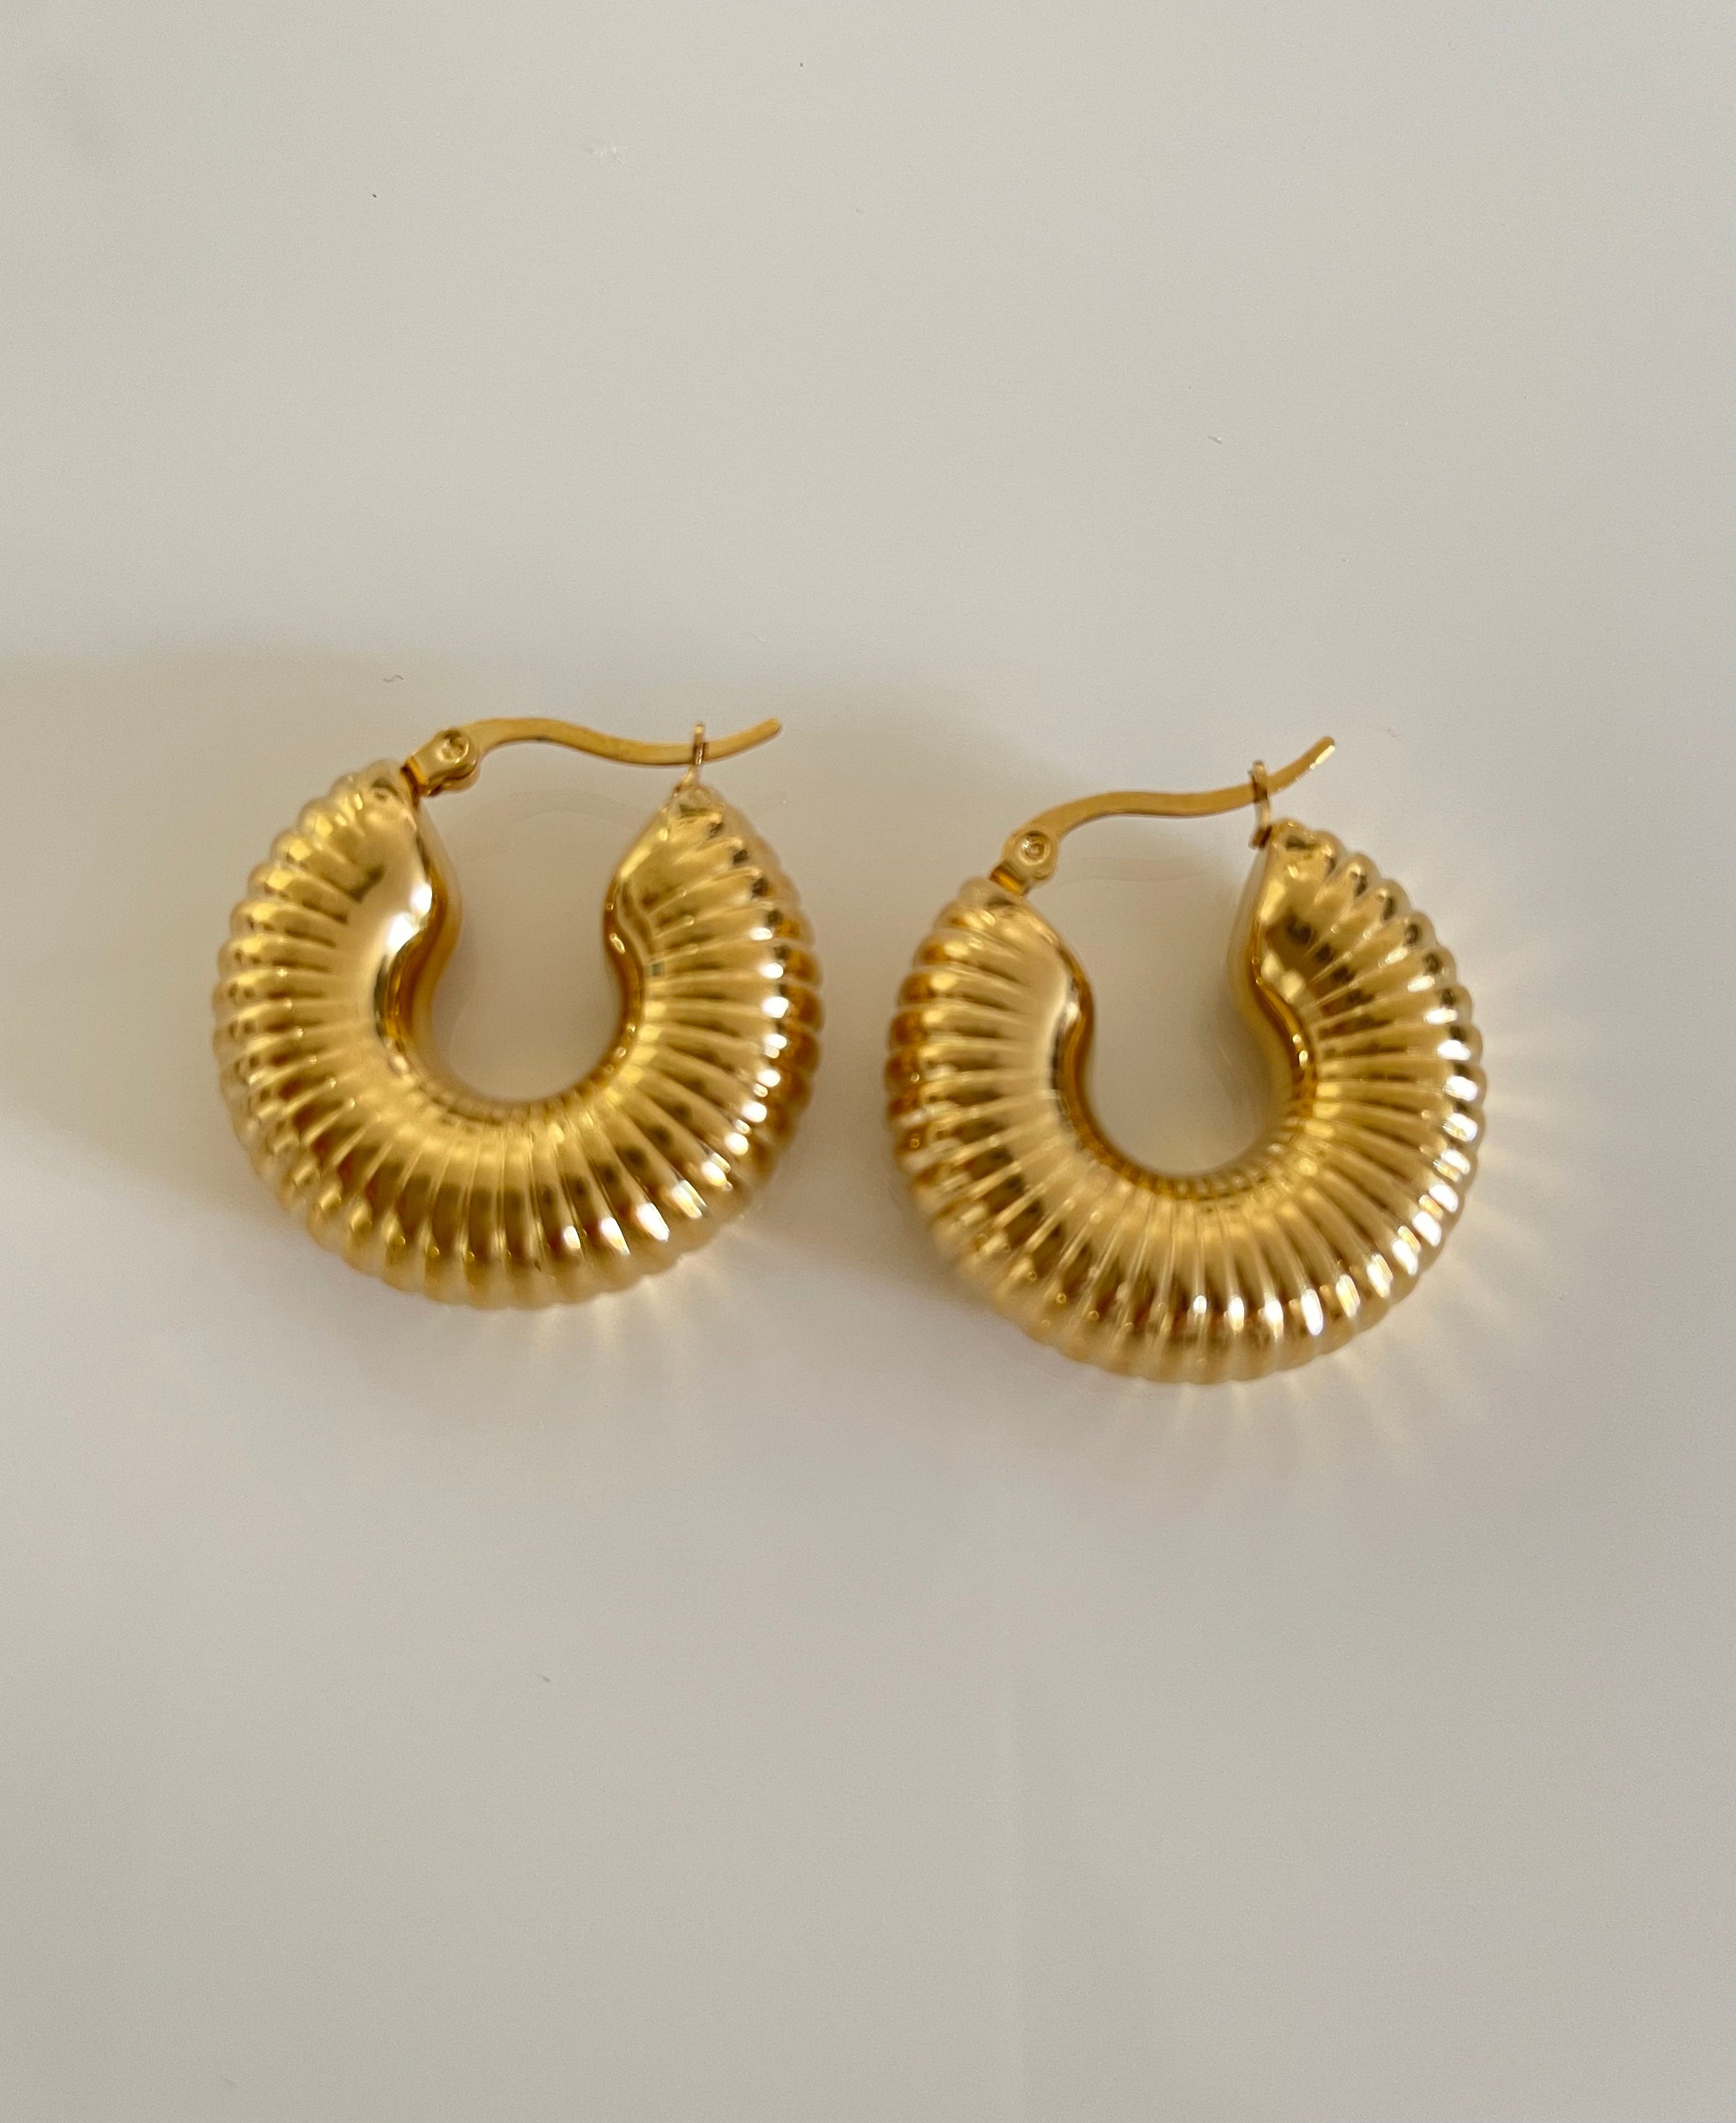 Gold filled textured hoops